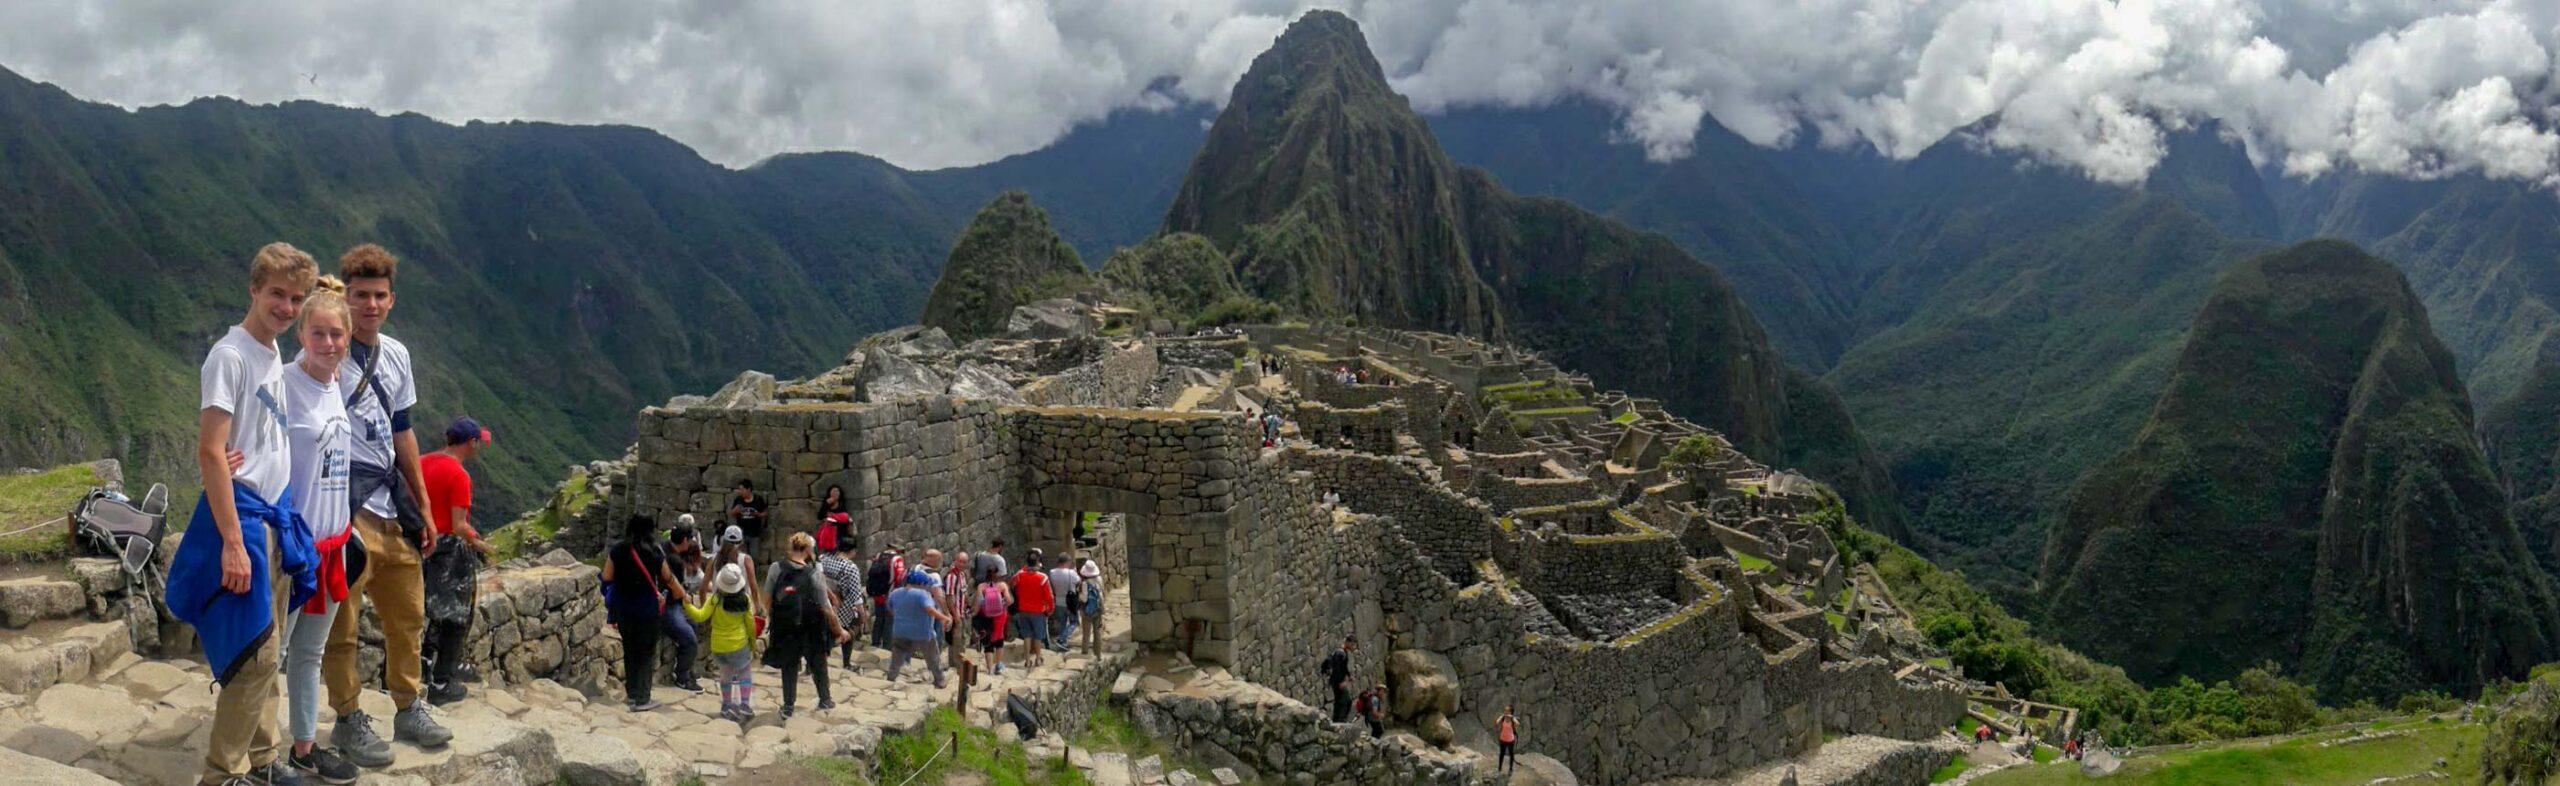 Cusco City, Sacred Valley & Machu Picchu tour is wrapped into 3 days of Inca culture, history and the most breathtaking views the region has to offer.